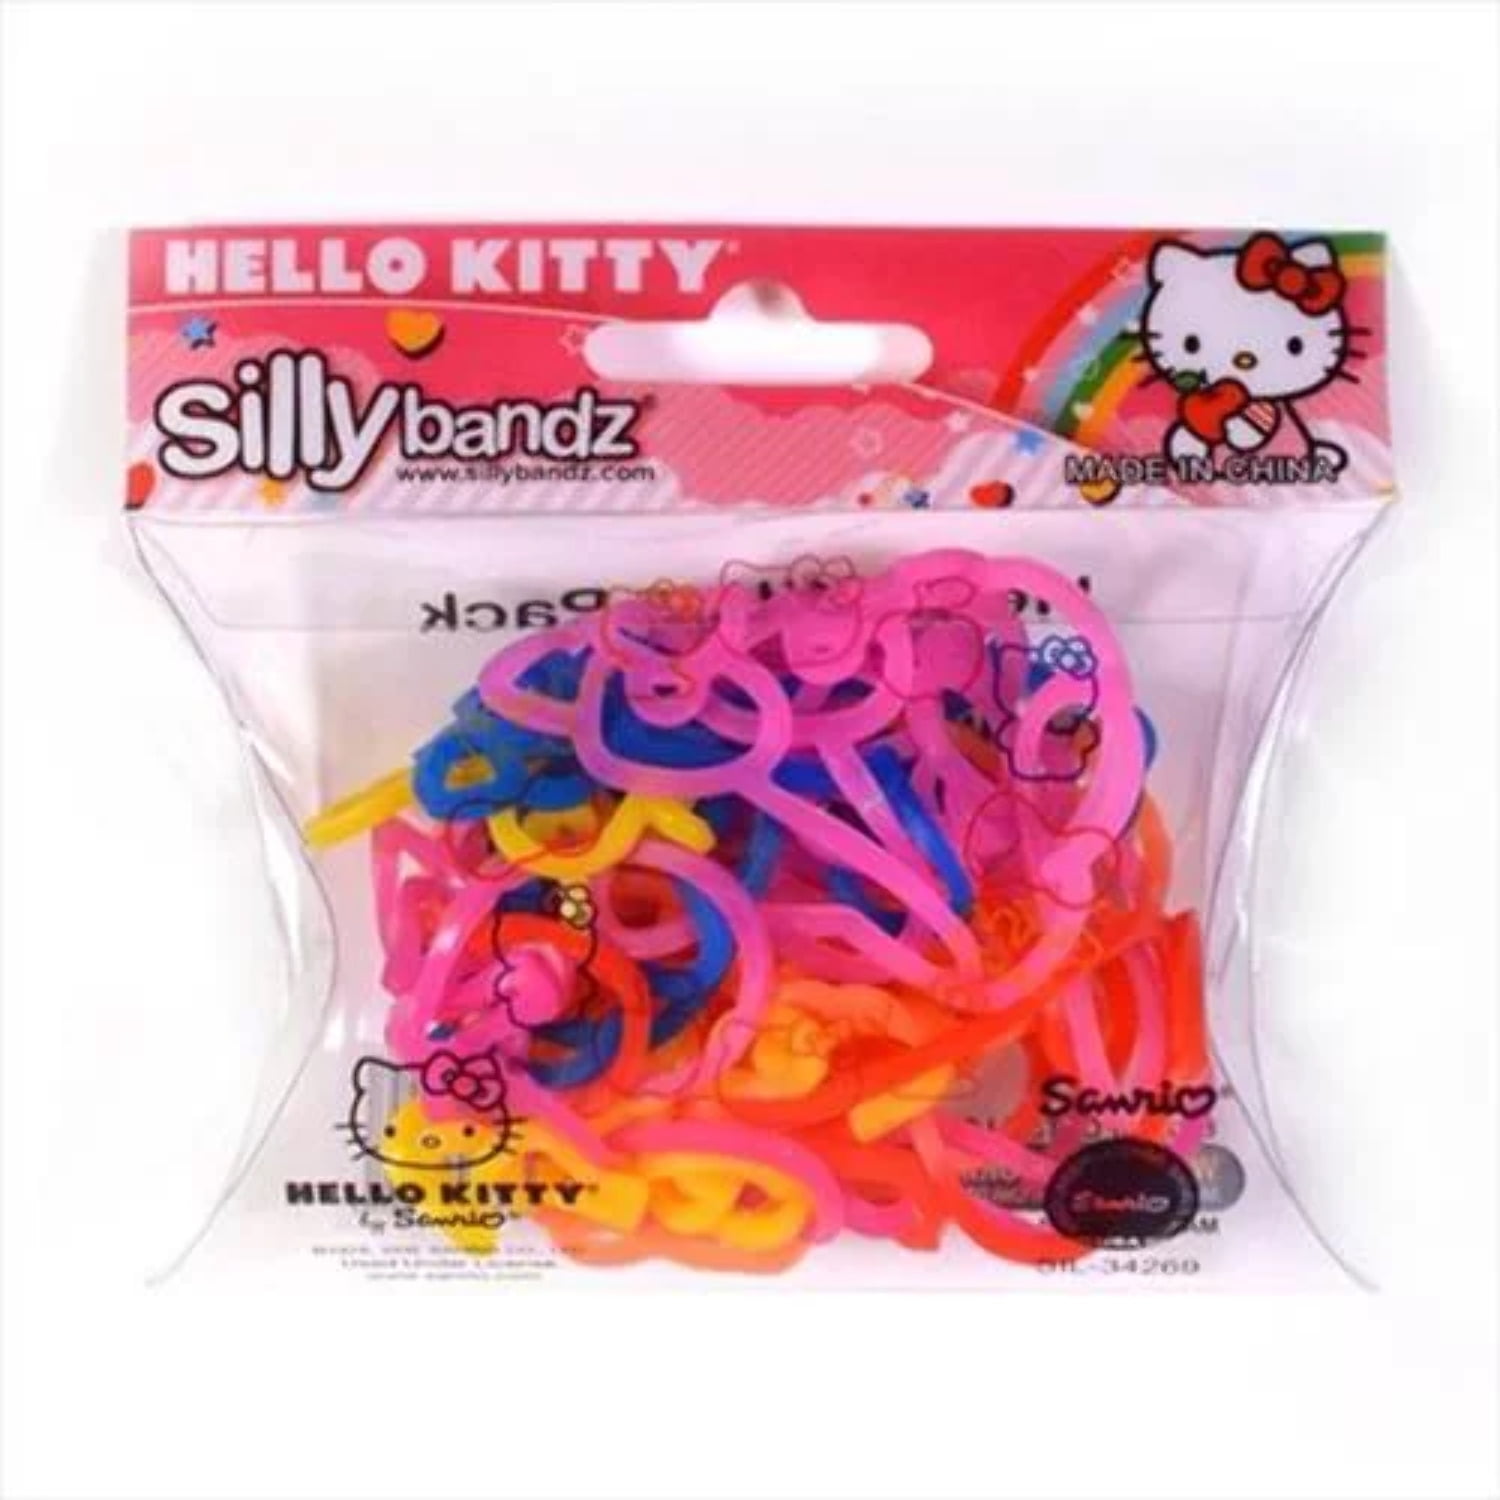 Silly Bandz Rubber Bands - Zoo Shapes 24-Pack 